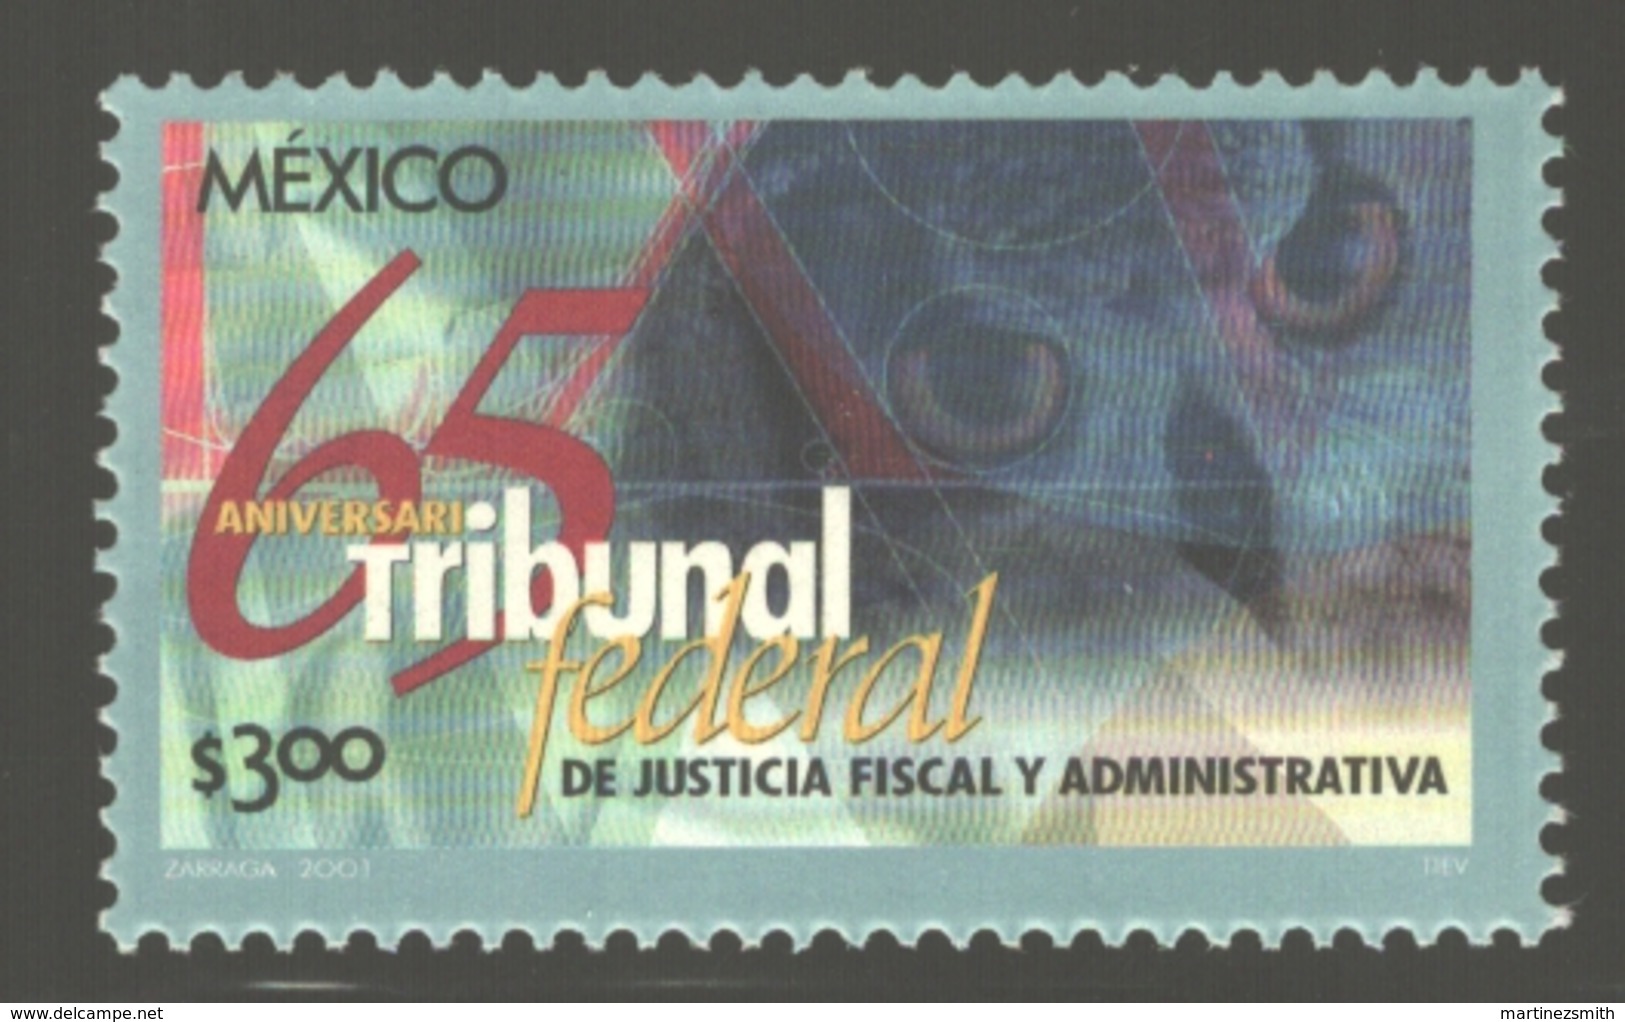 Mexico - Mexique 2001 Yvert 1960, 65th Anniversary Of The Federal Court Of Tax And Administrative Justice - MNH - México